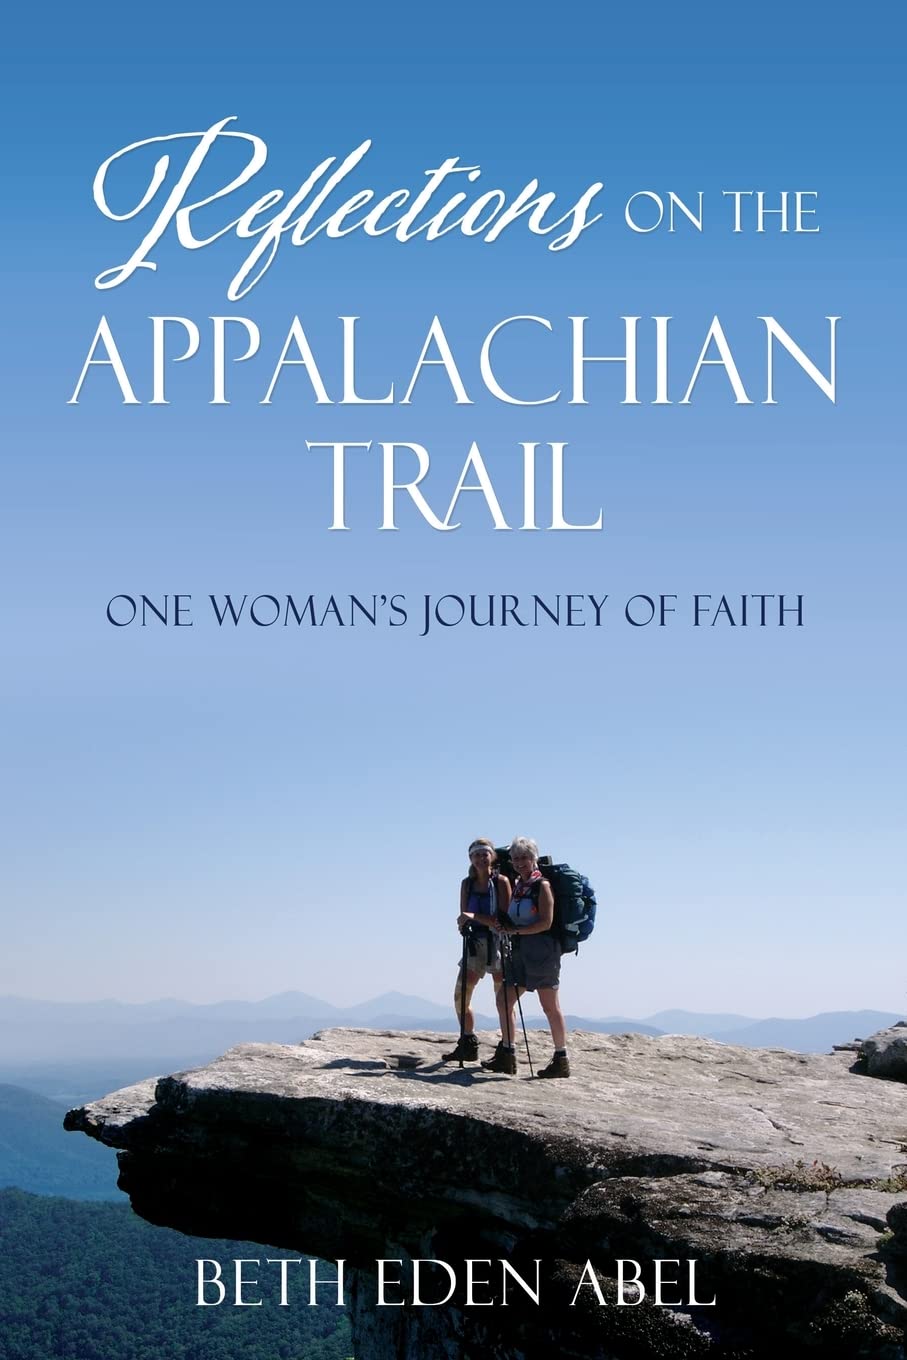 Reflections on the Appalachian Trail: one woman's journey of faith